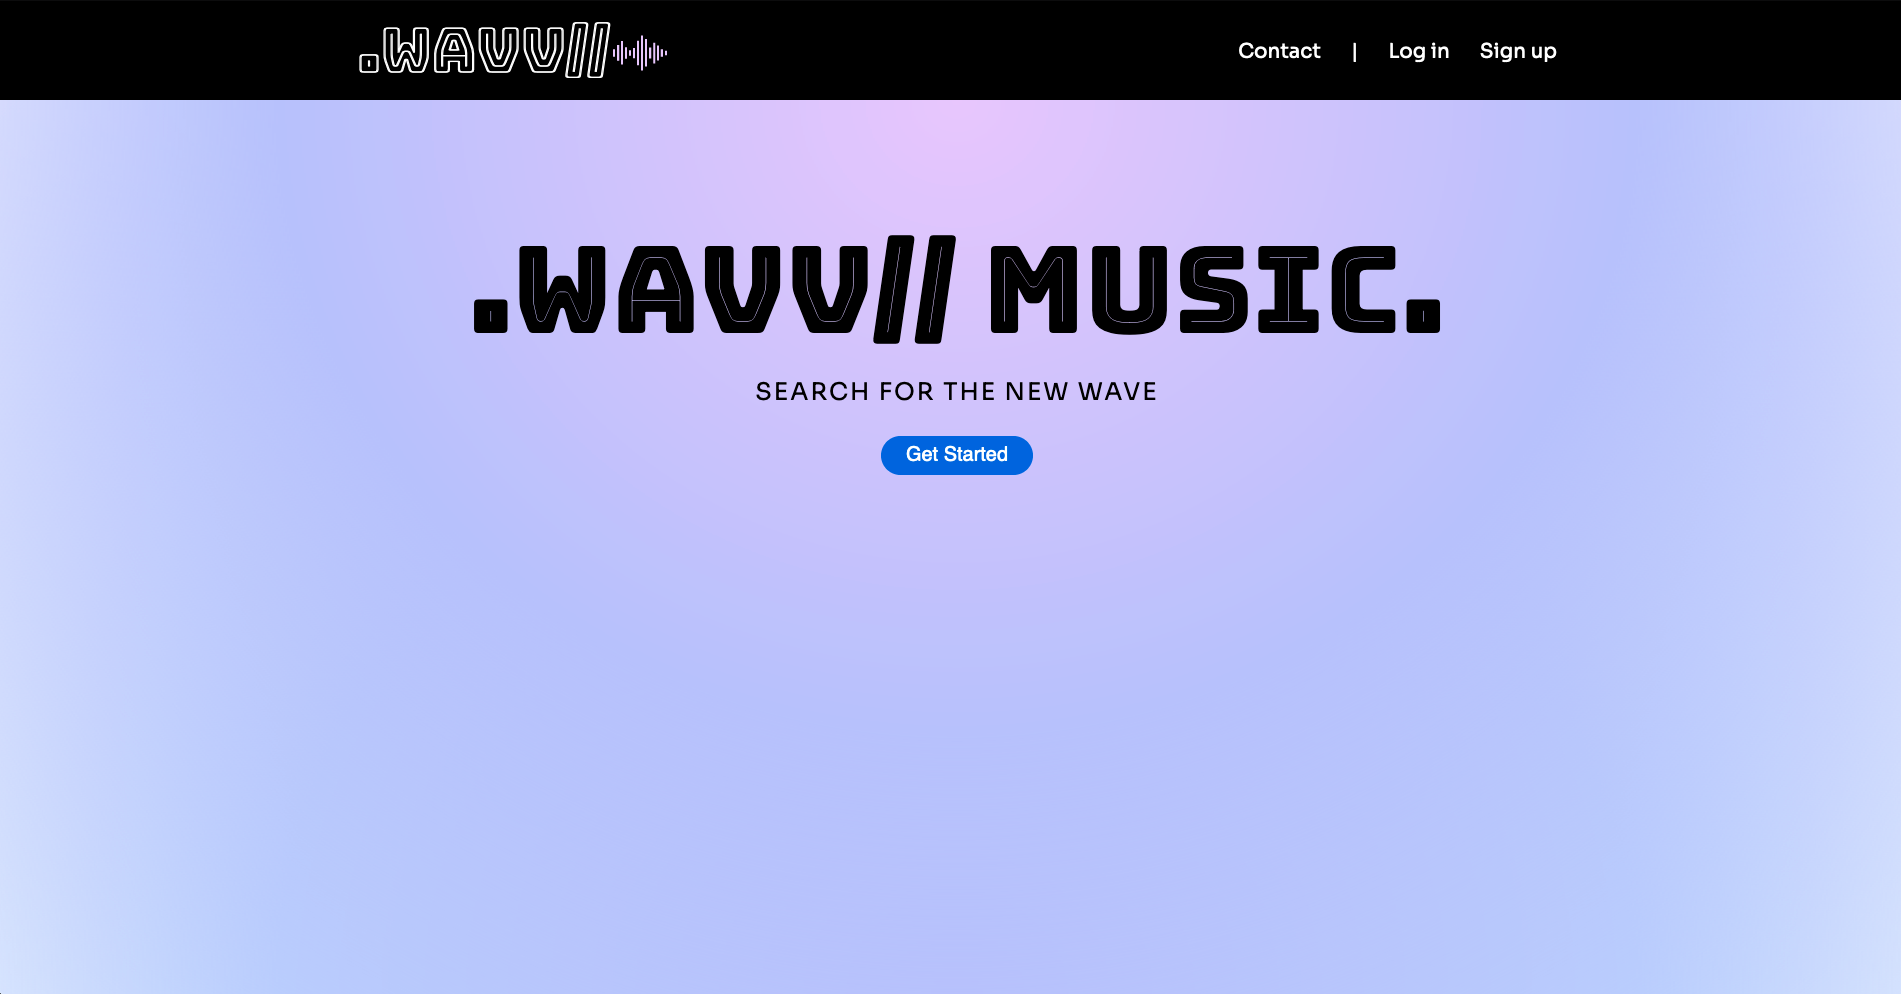 Snapshot of web page for .wavv muisc